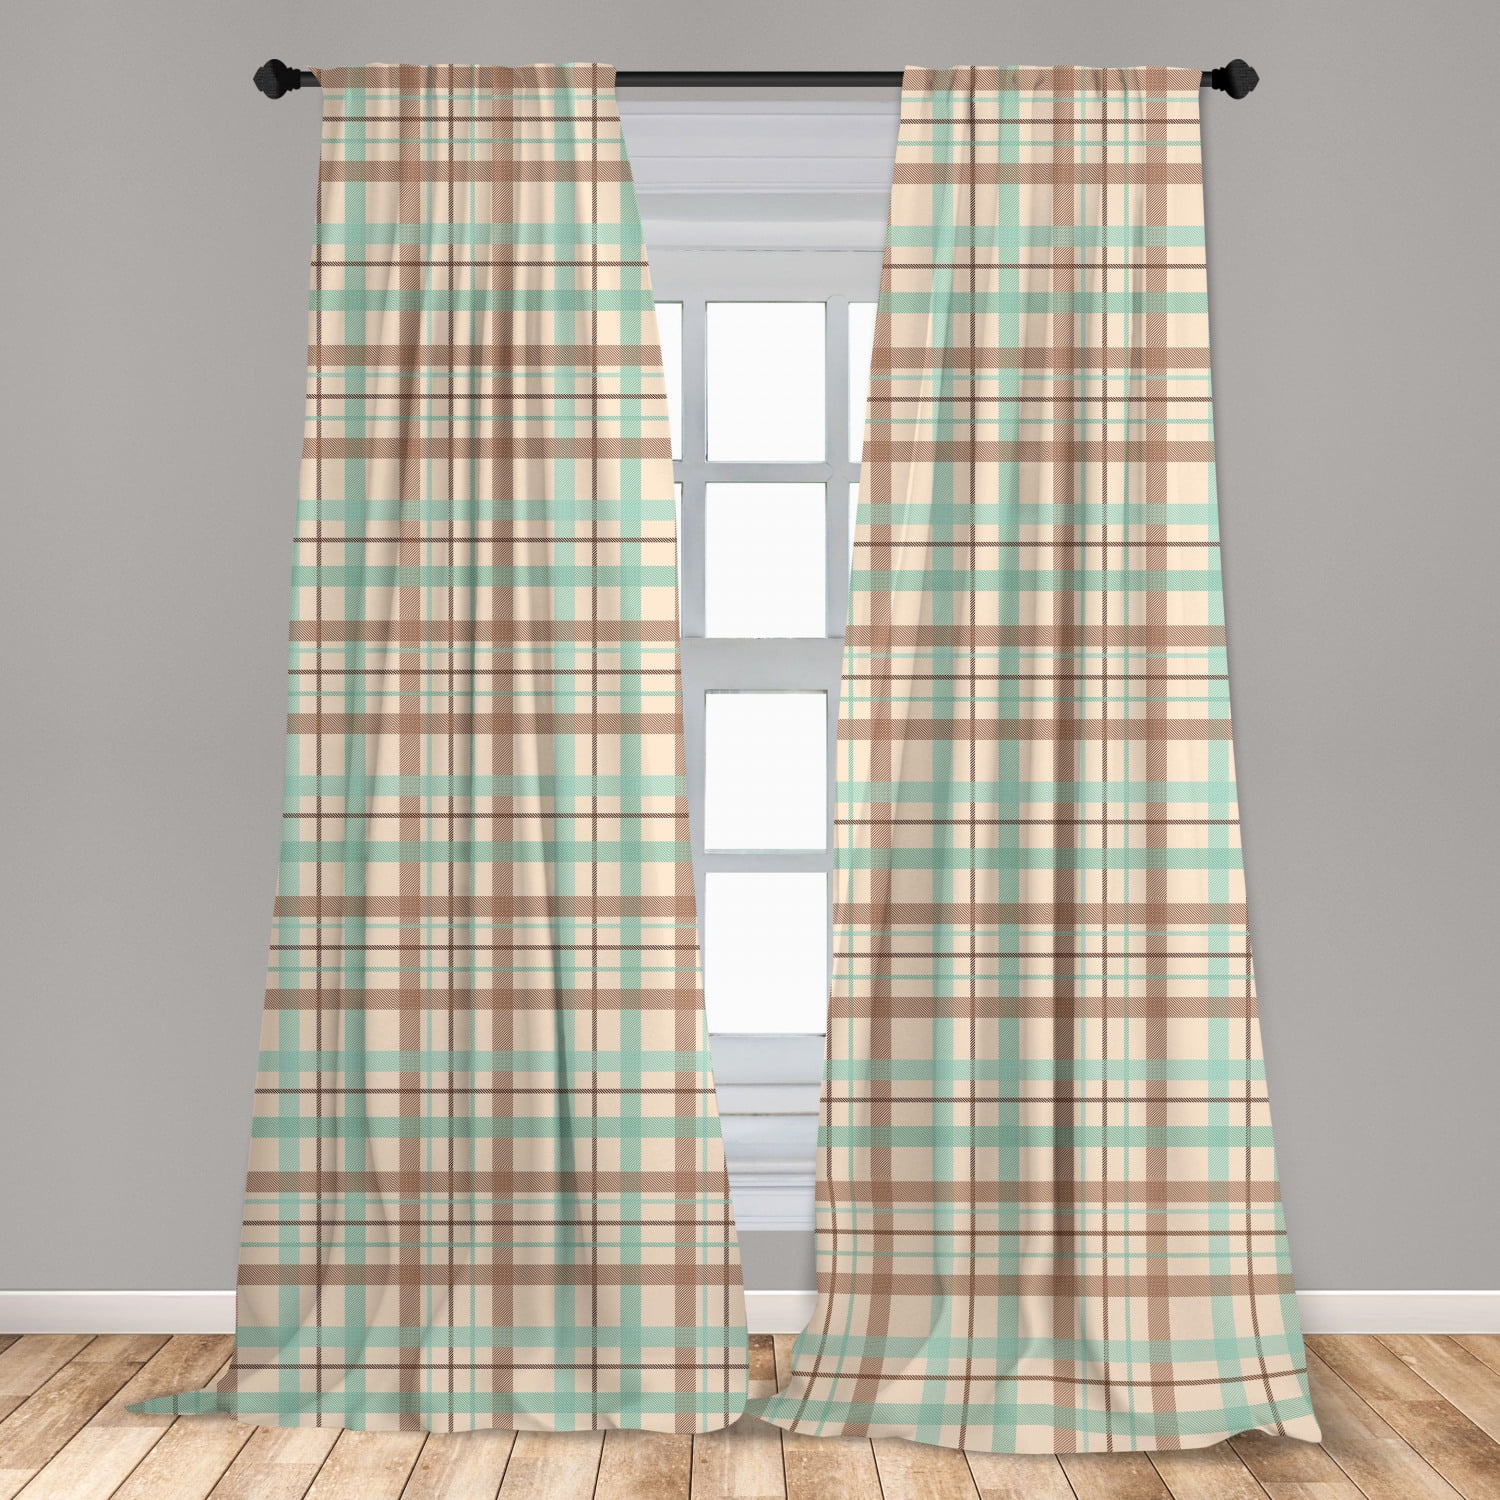 Gentry Panel Curtains 72WX84L Lined Plaid Cotton Taupe Tan Gray Cream Red 